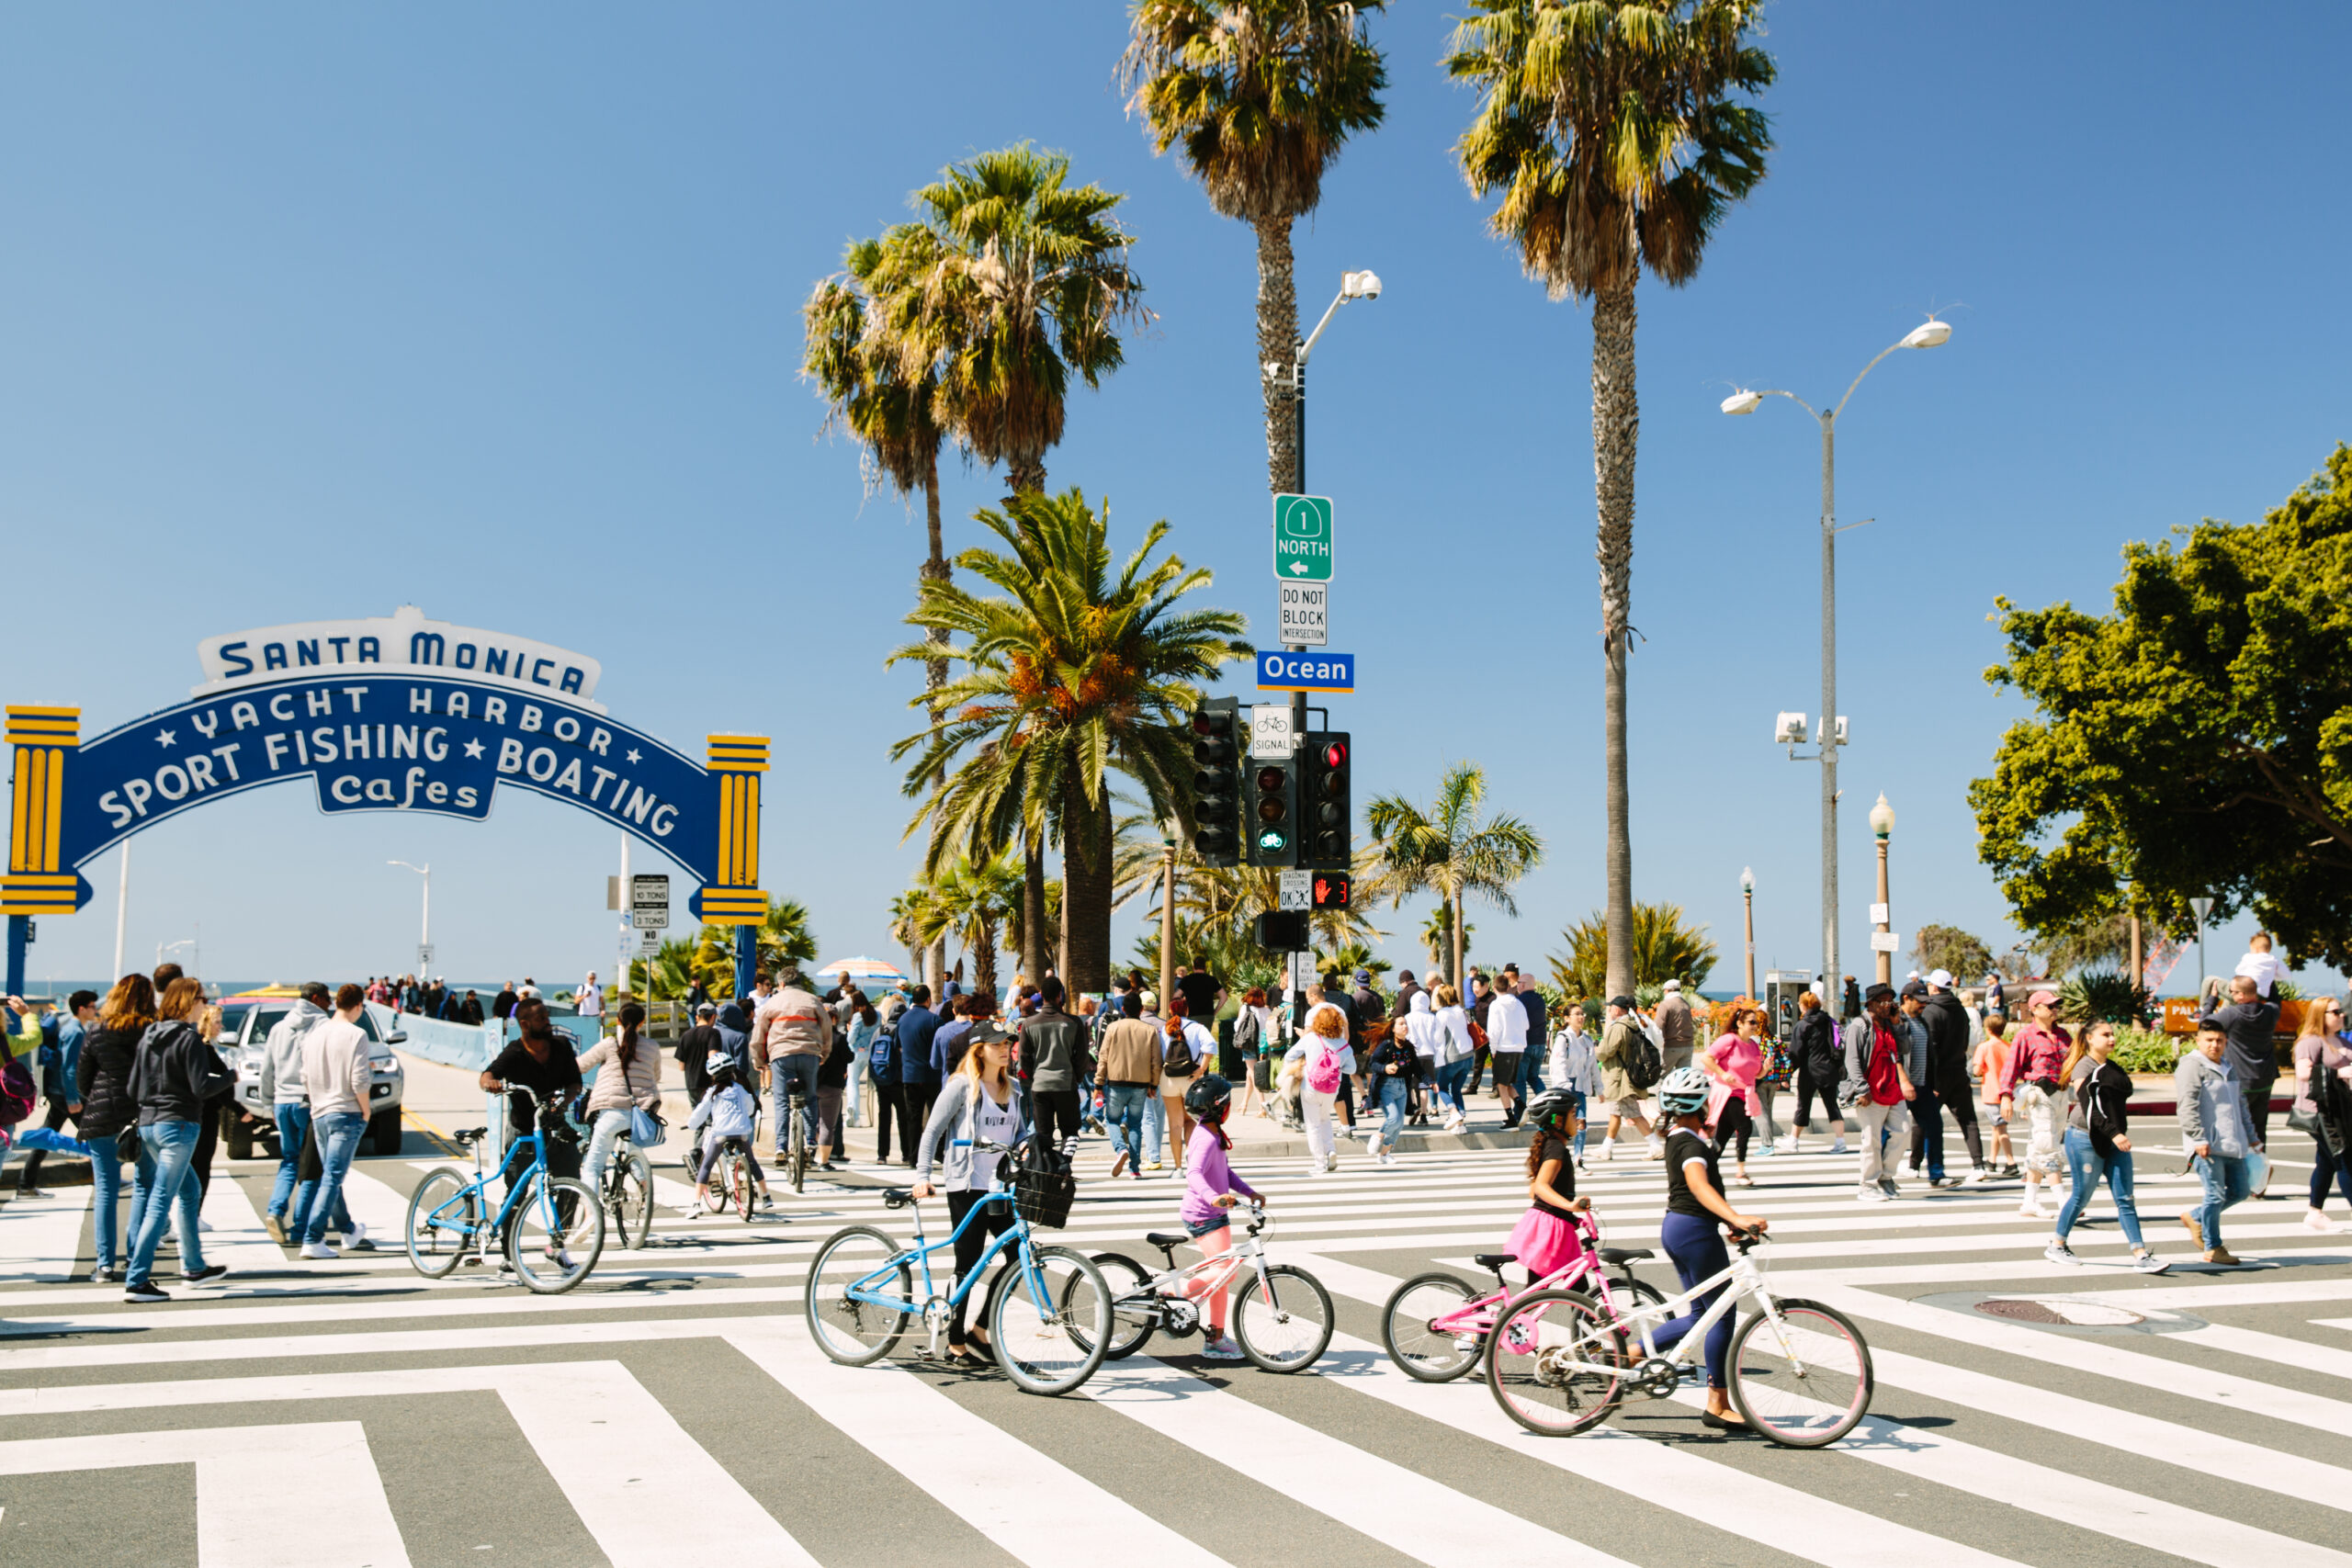 how many tourists visit santa monica each year